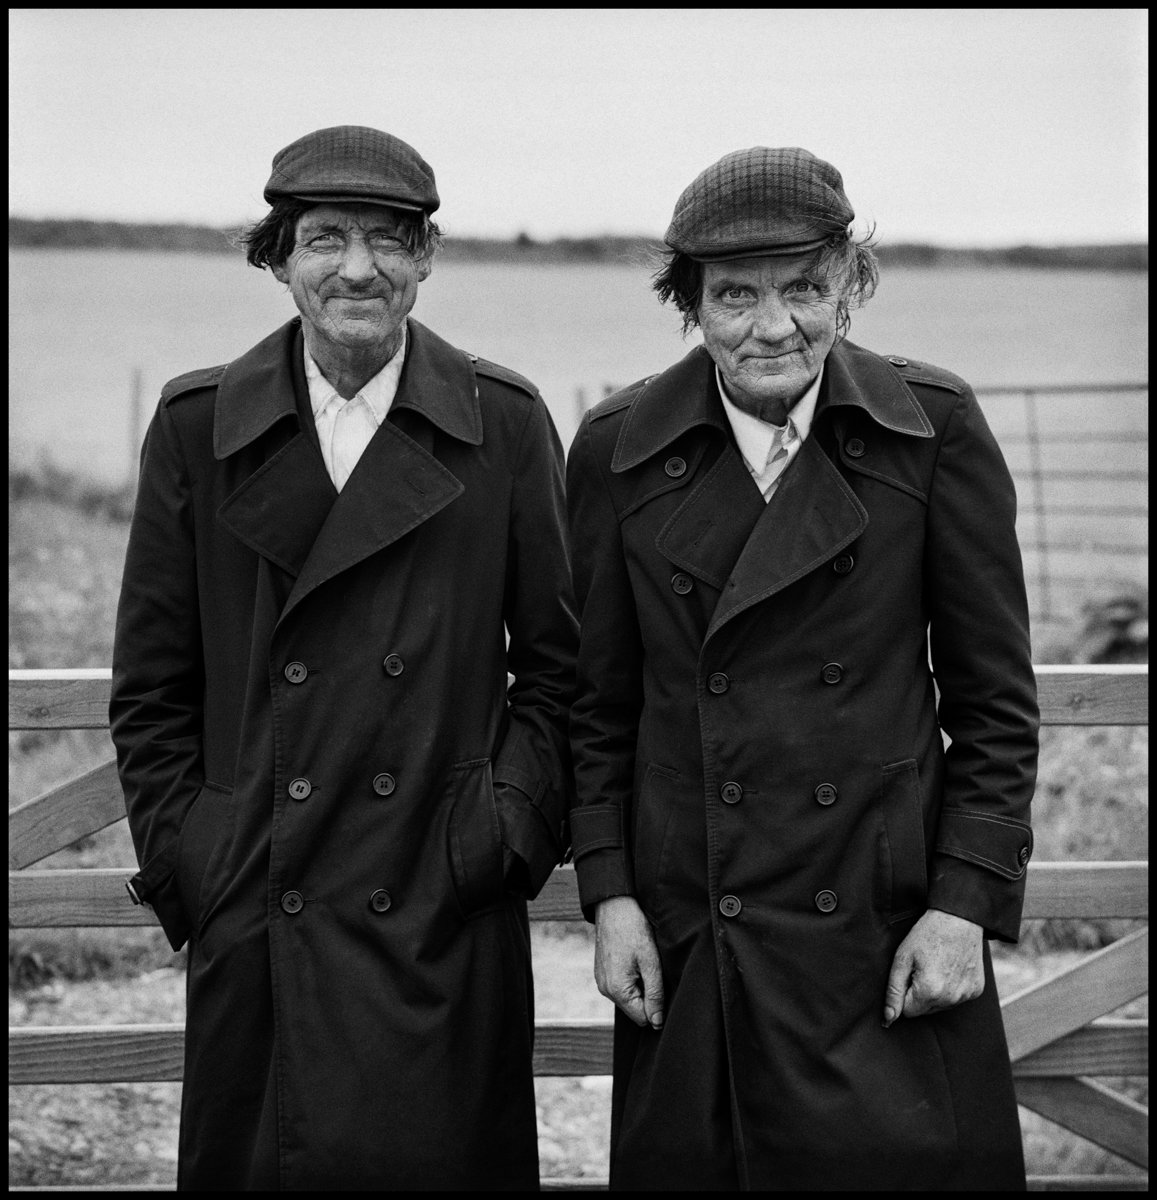 Brothers, England, 1994